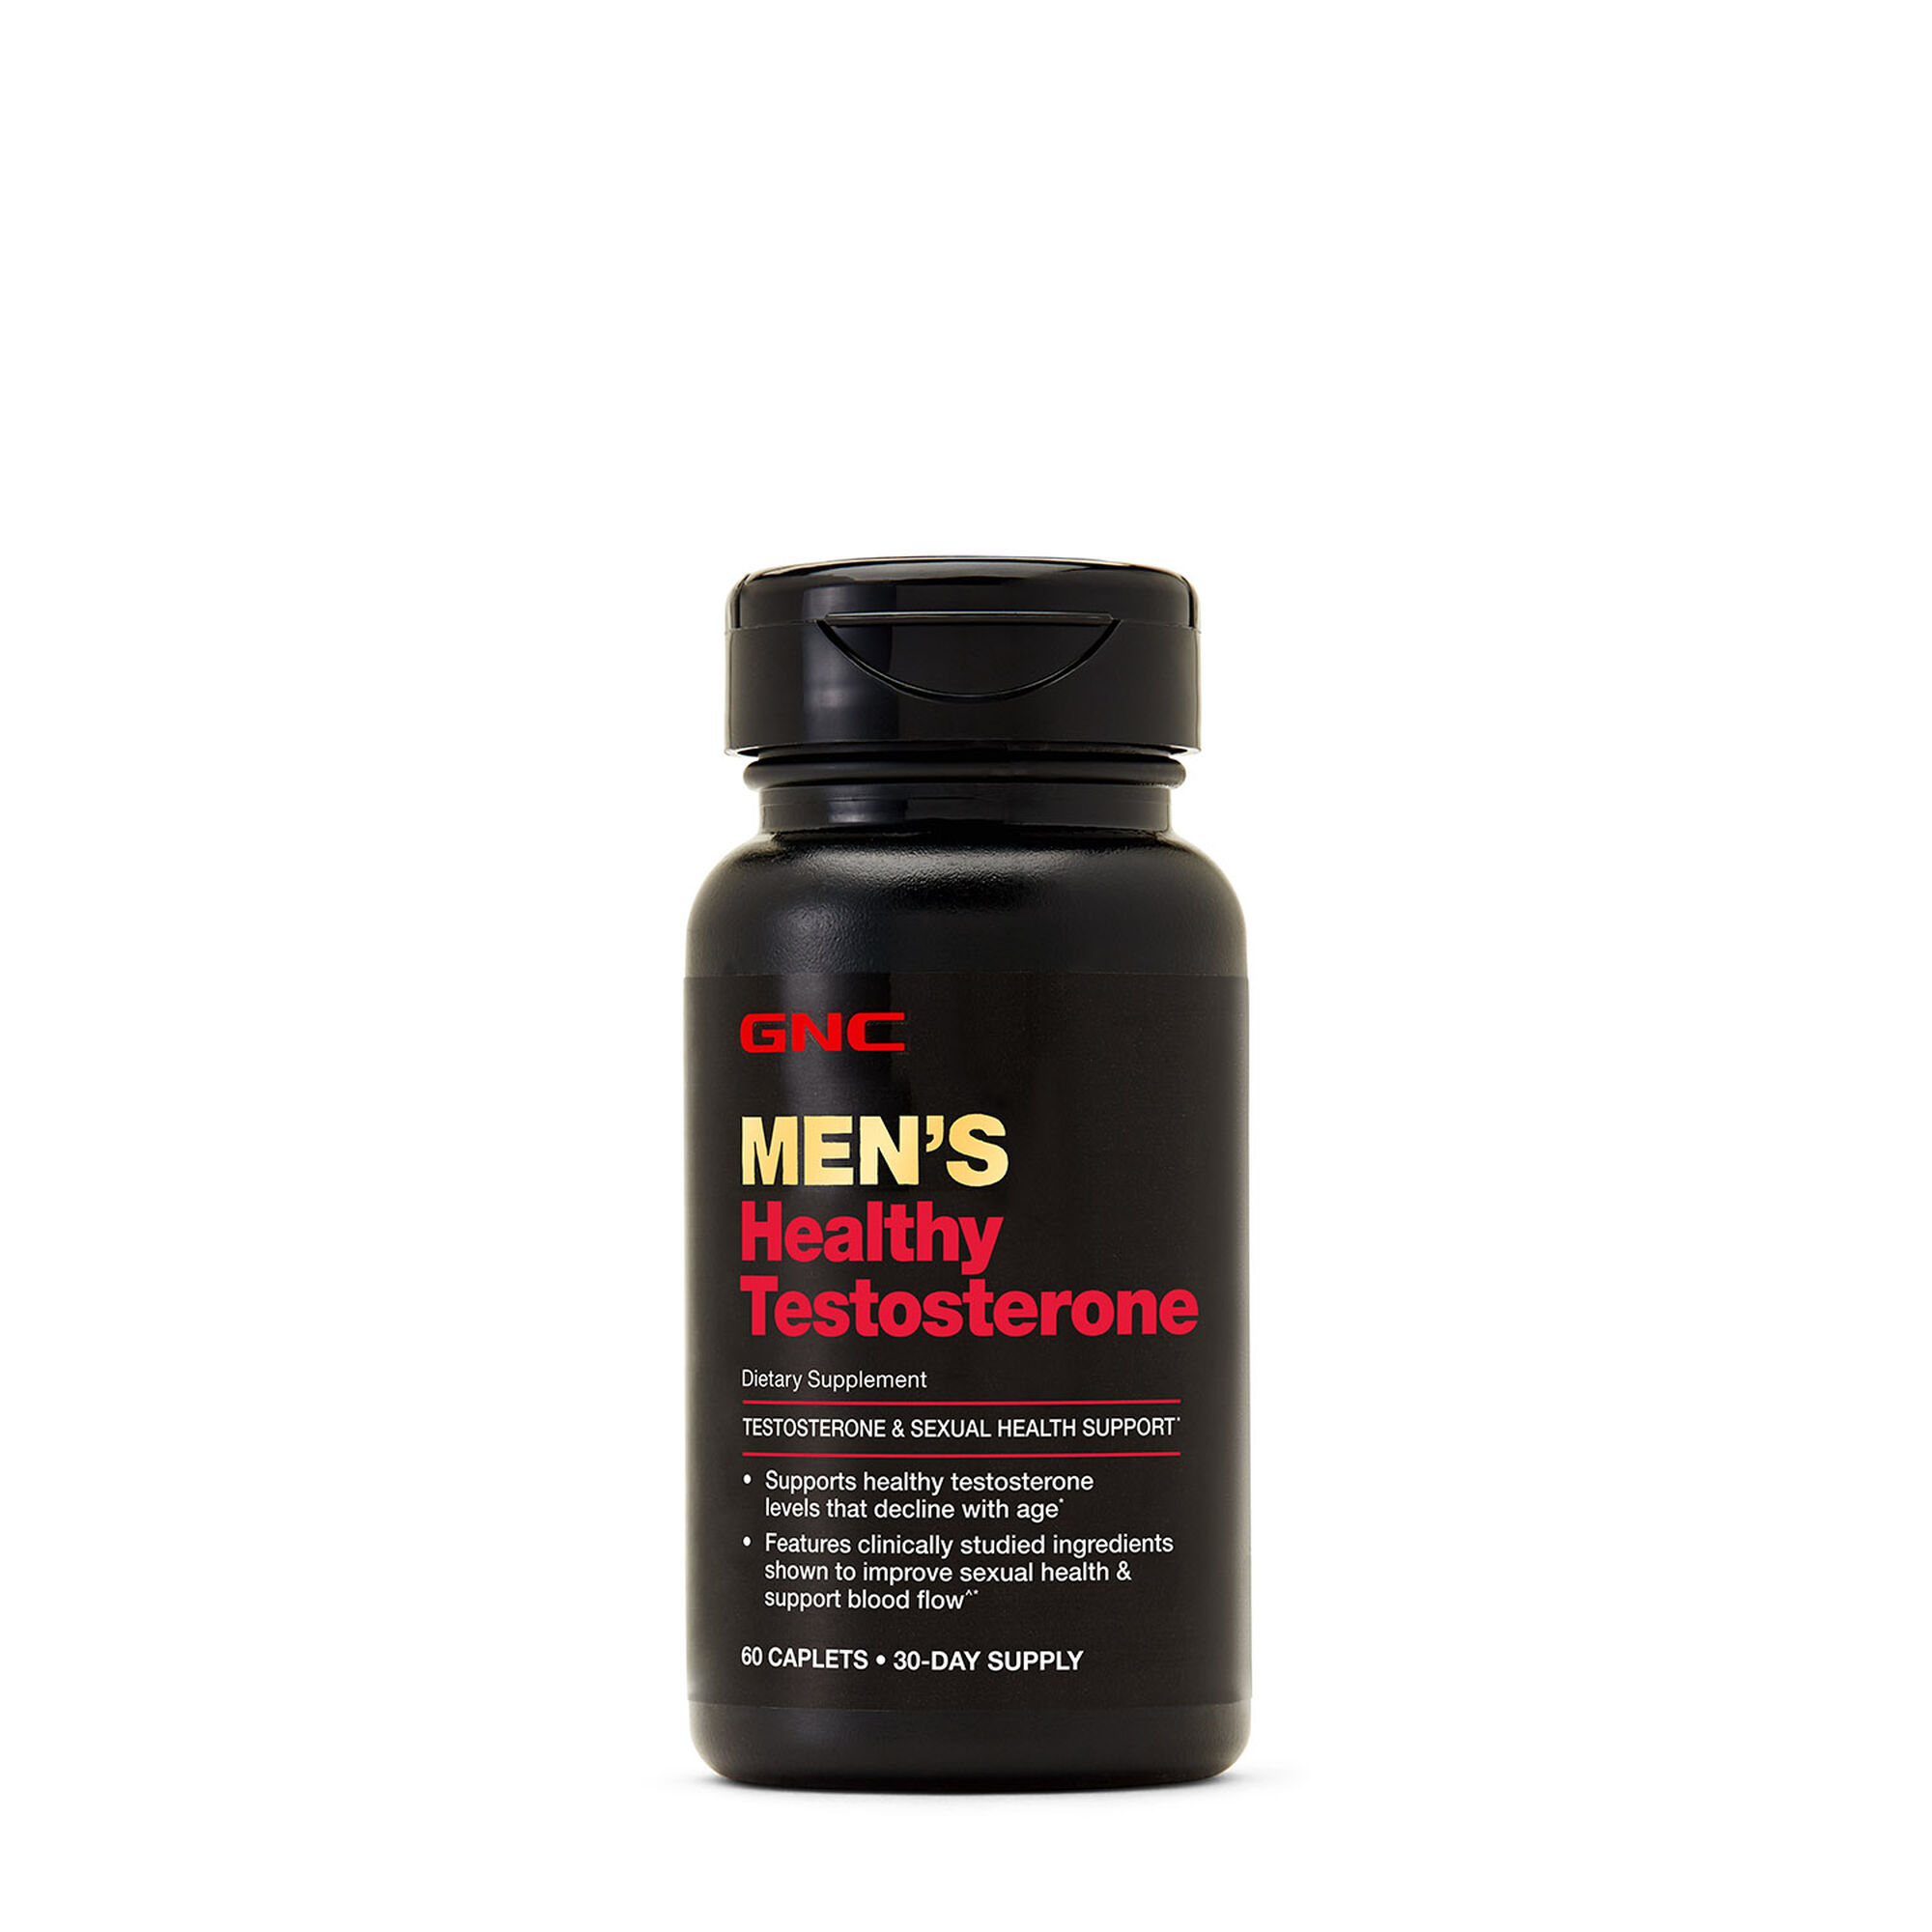 Does Gnc Testosterone Booster Work